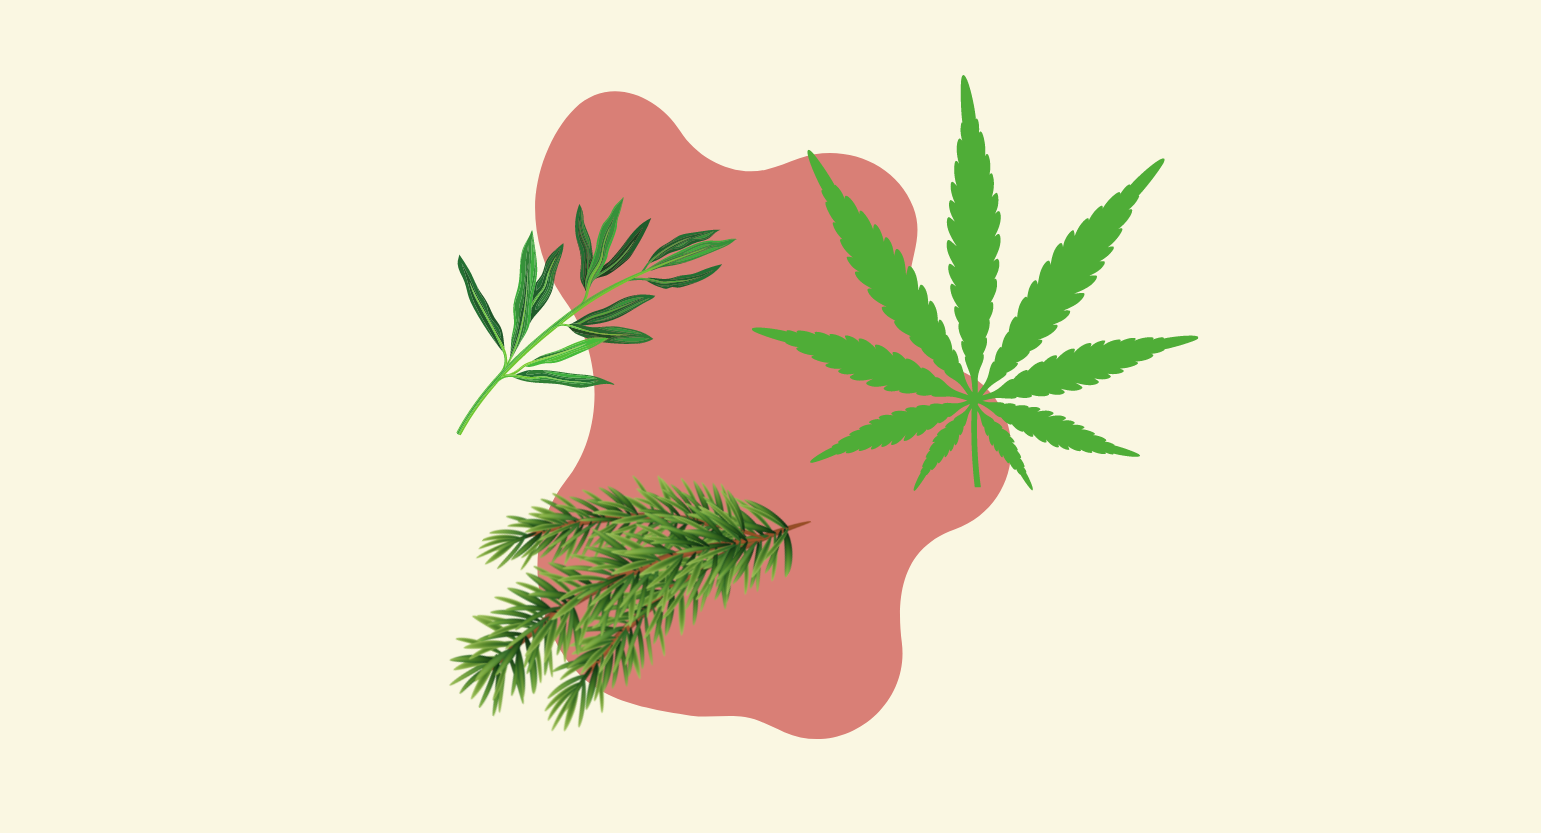 Cannabis flower and other herbs (illustration)